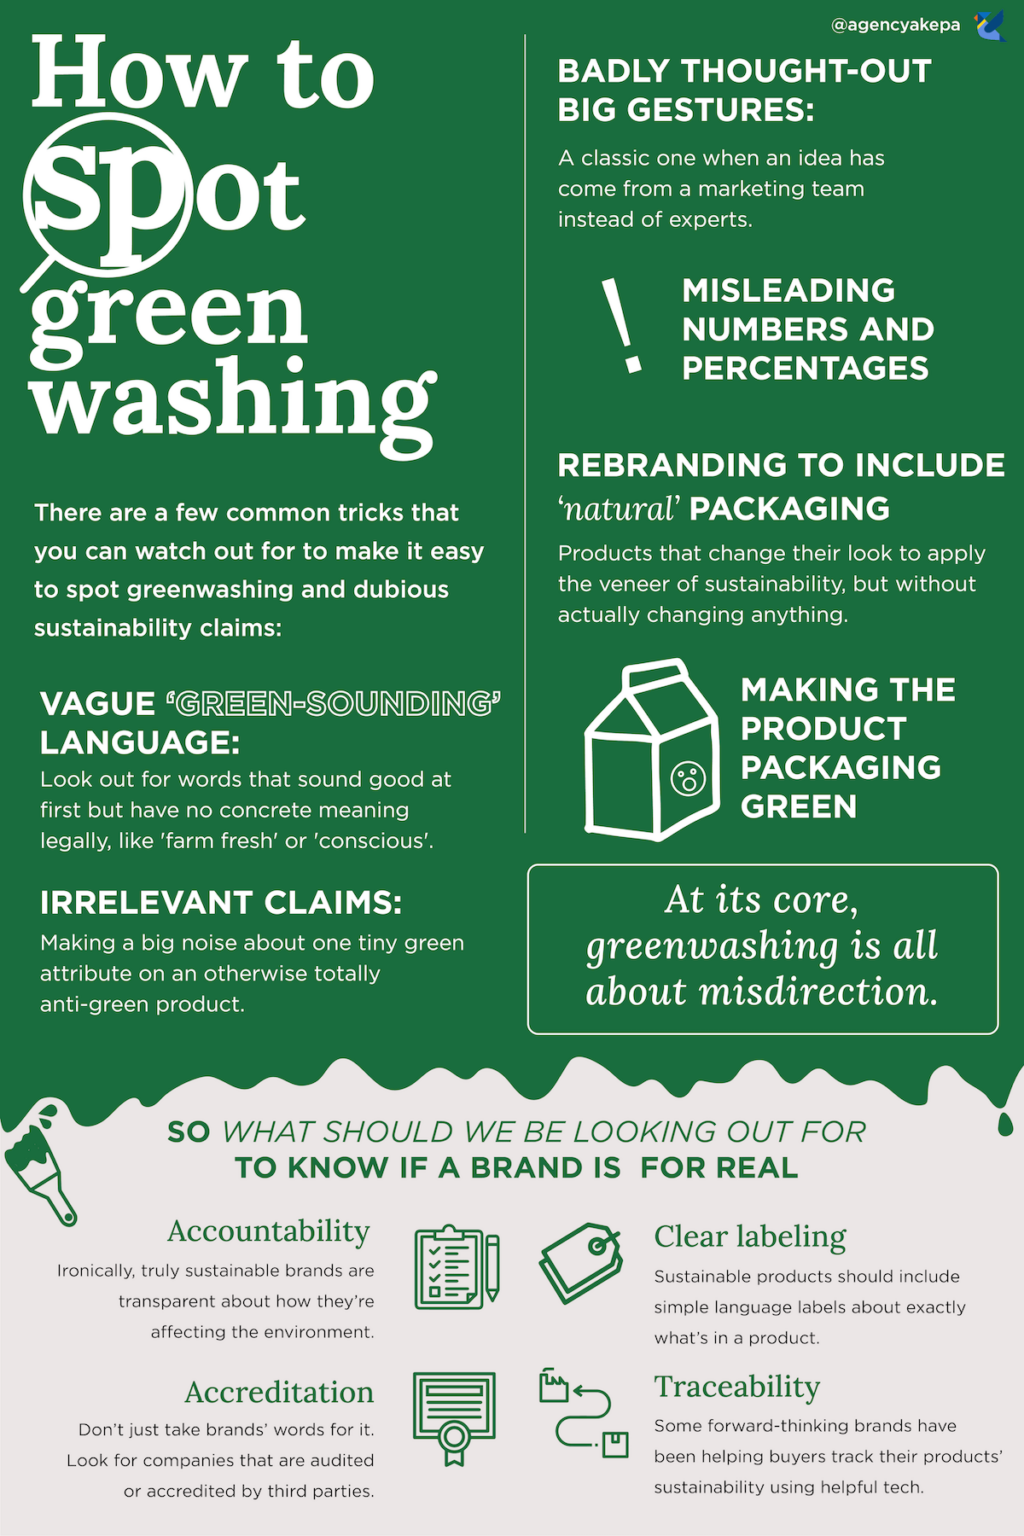 Greenwashing examples for 2022 & 2023 Worst products & brands